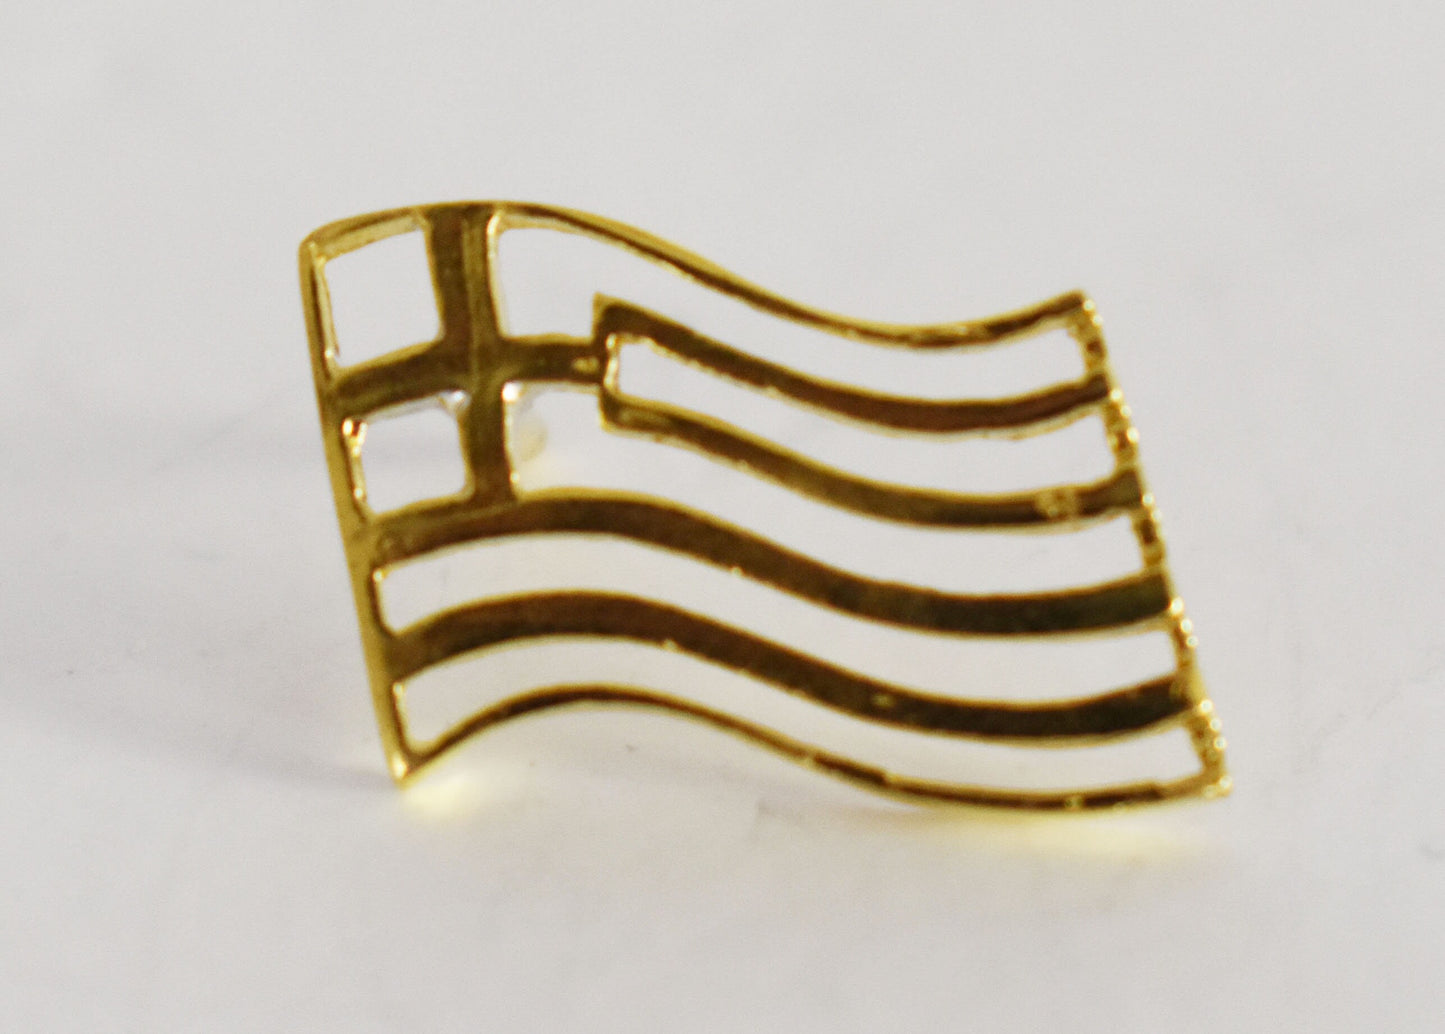 National Flag of Greece - Βlue and White - Freedom or Death - Small - Pin - Pure Bronze Statue